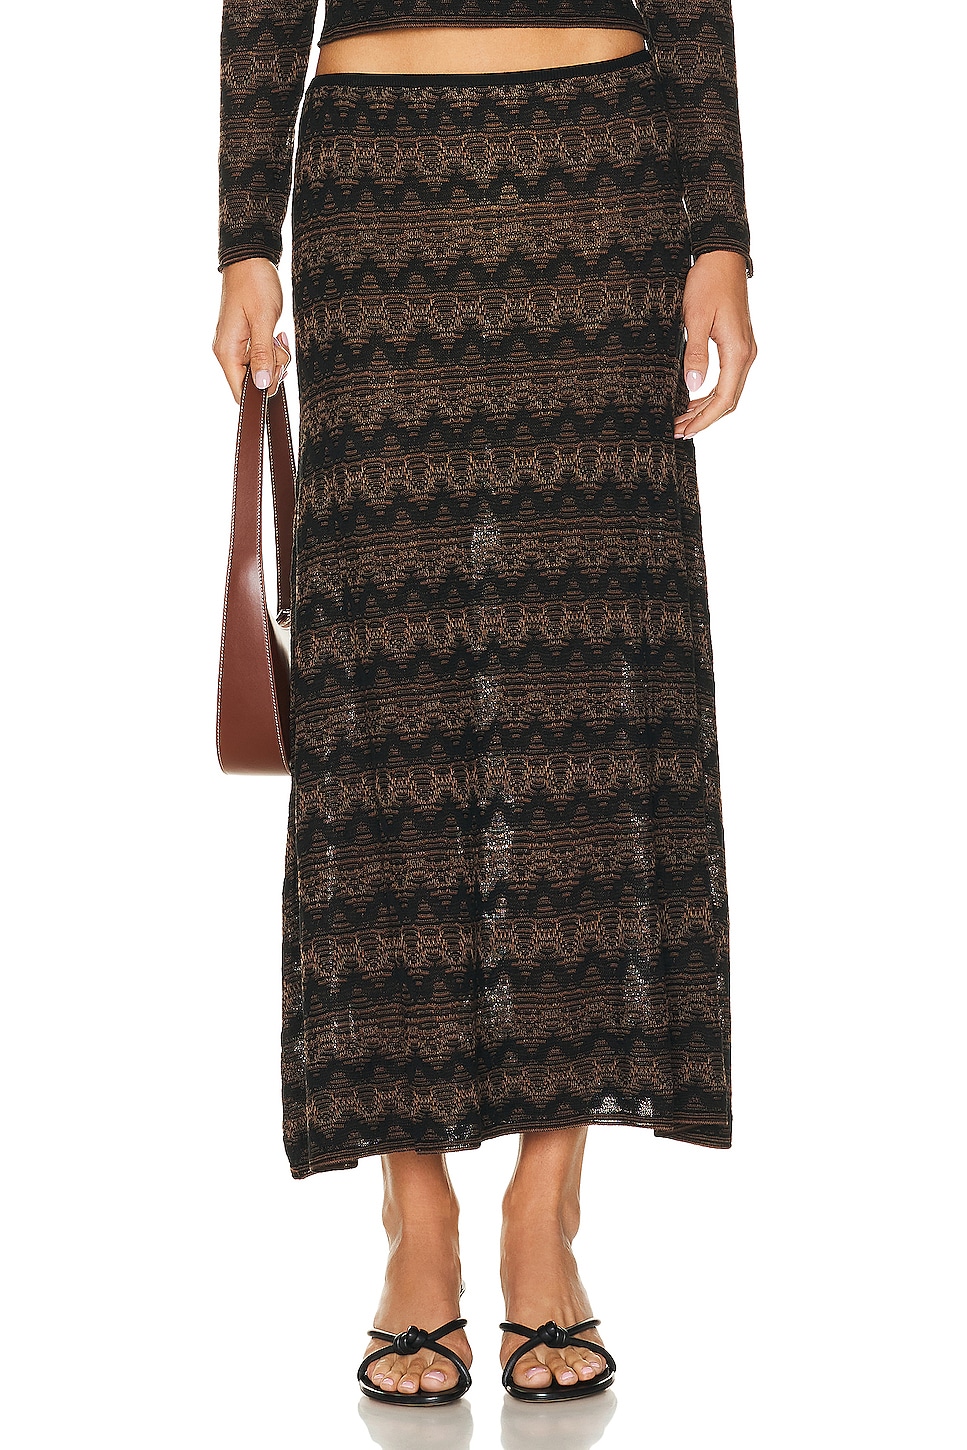 Image 1 of Christopher Esber Palais Knit Skirt in Black & Cacao